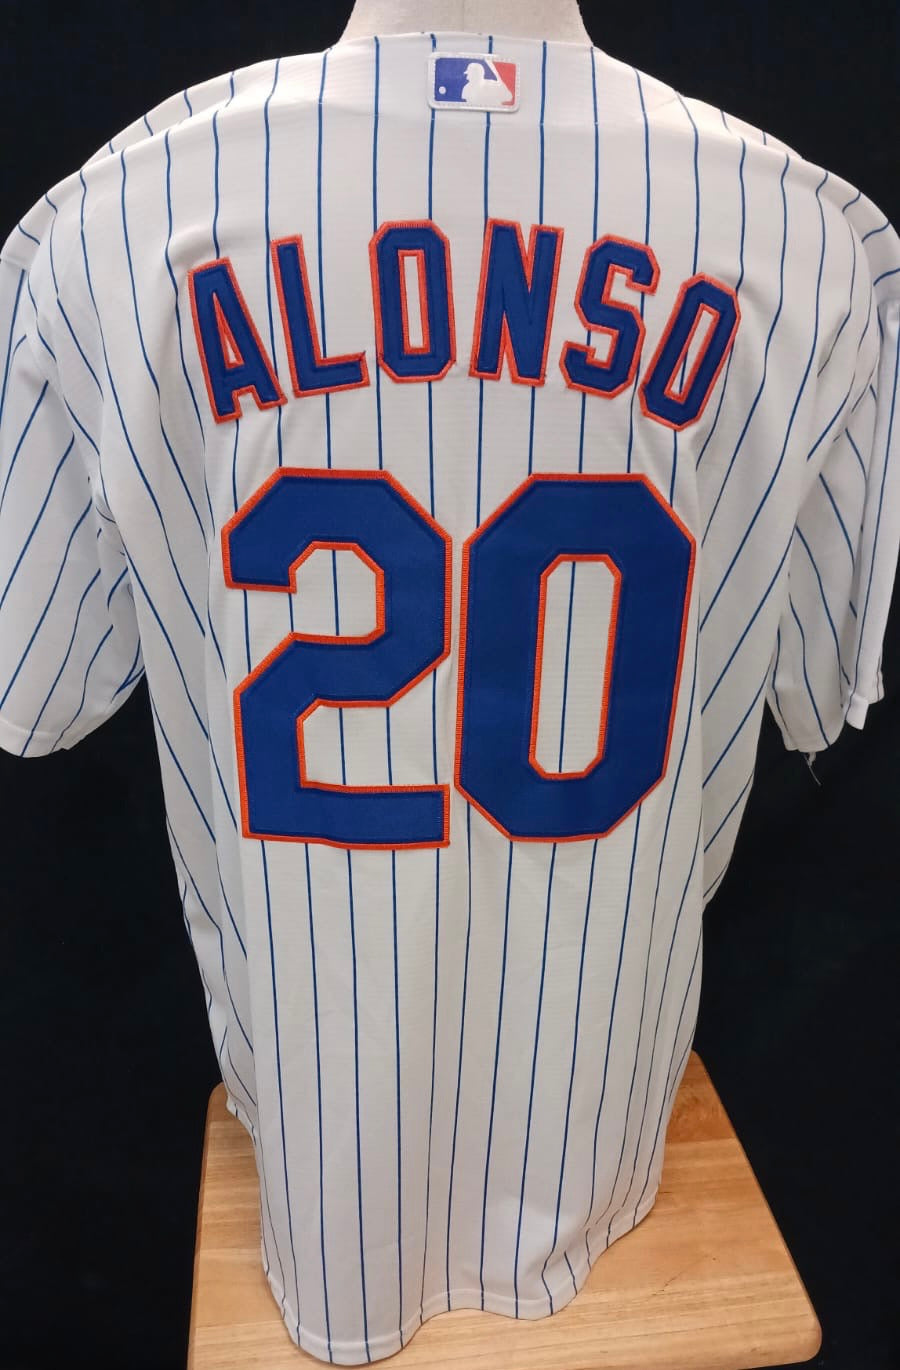 pete alonso home jersey